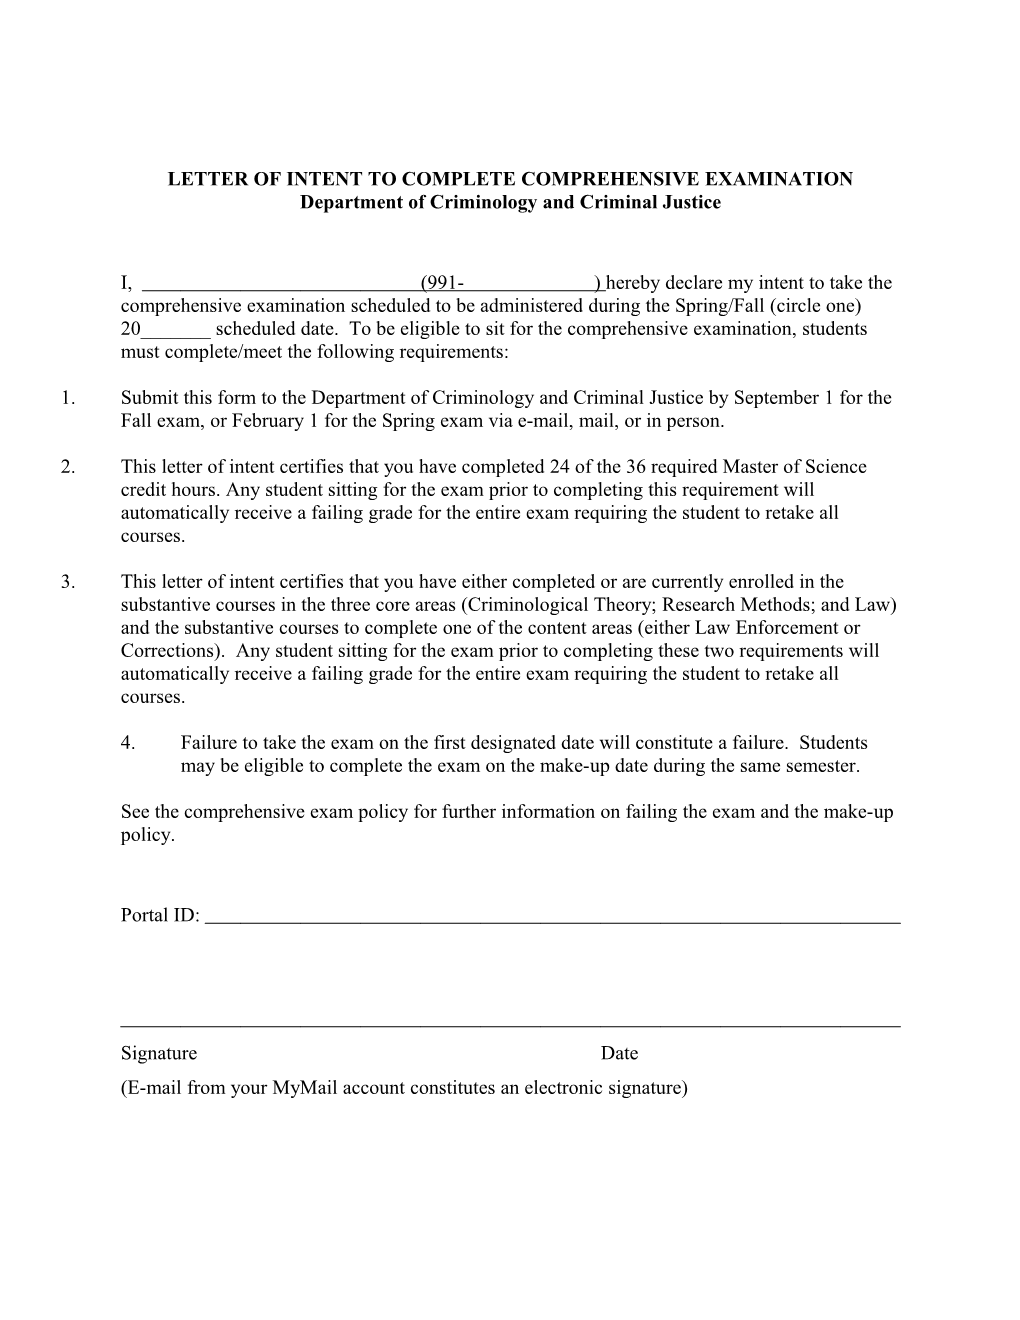 Letter Of Intent To Complete Comprehensive Examination